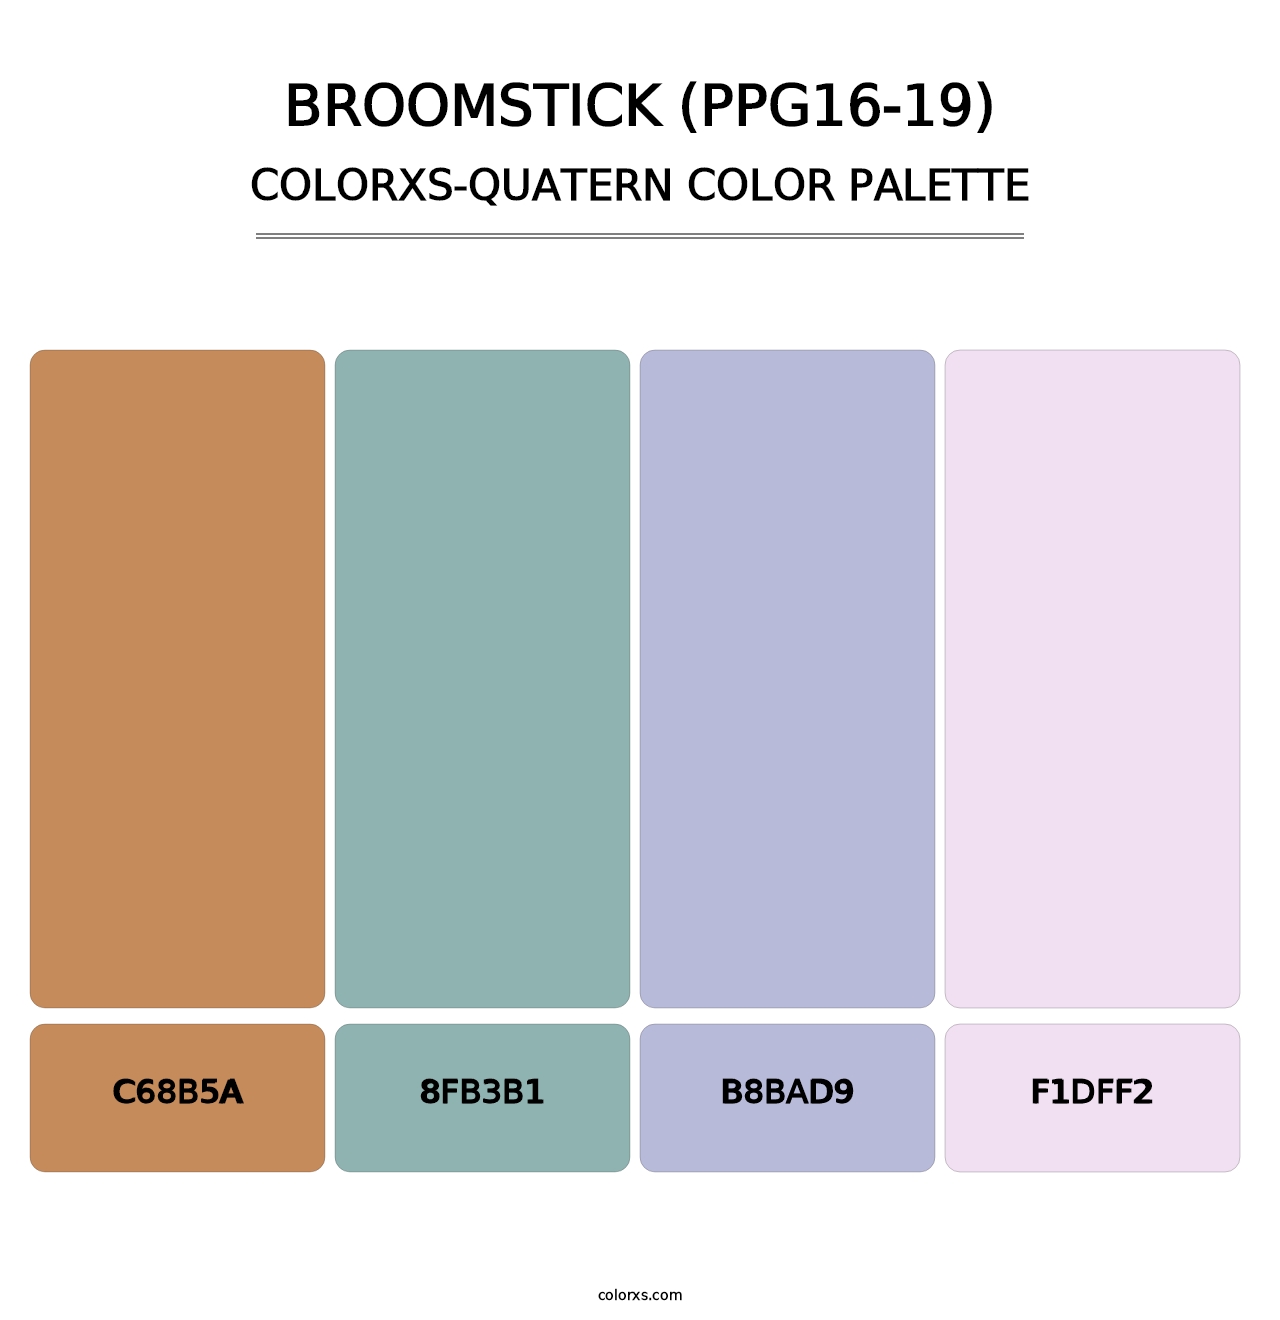 Broomstick (PPG16-19) - Colorxs Quatern Palette